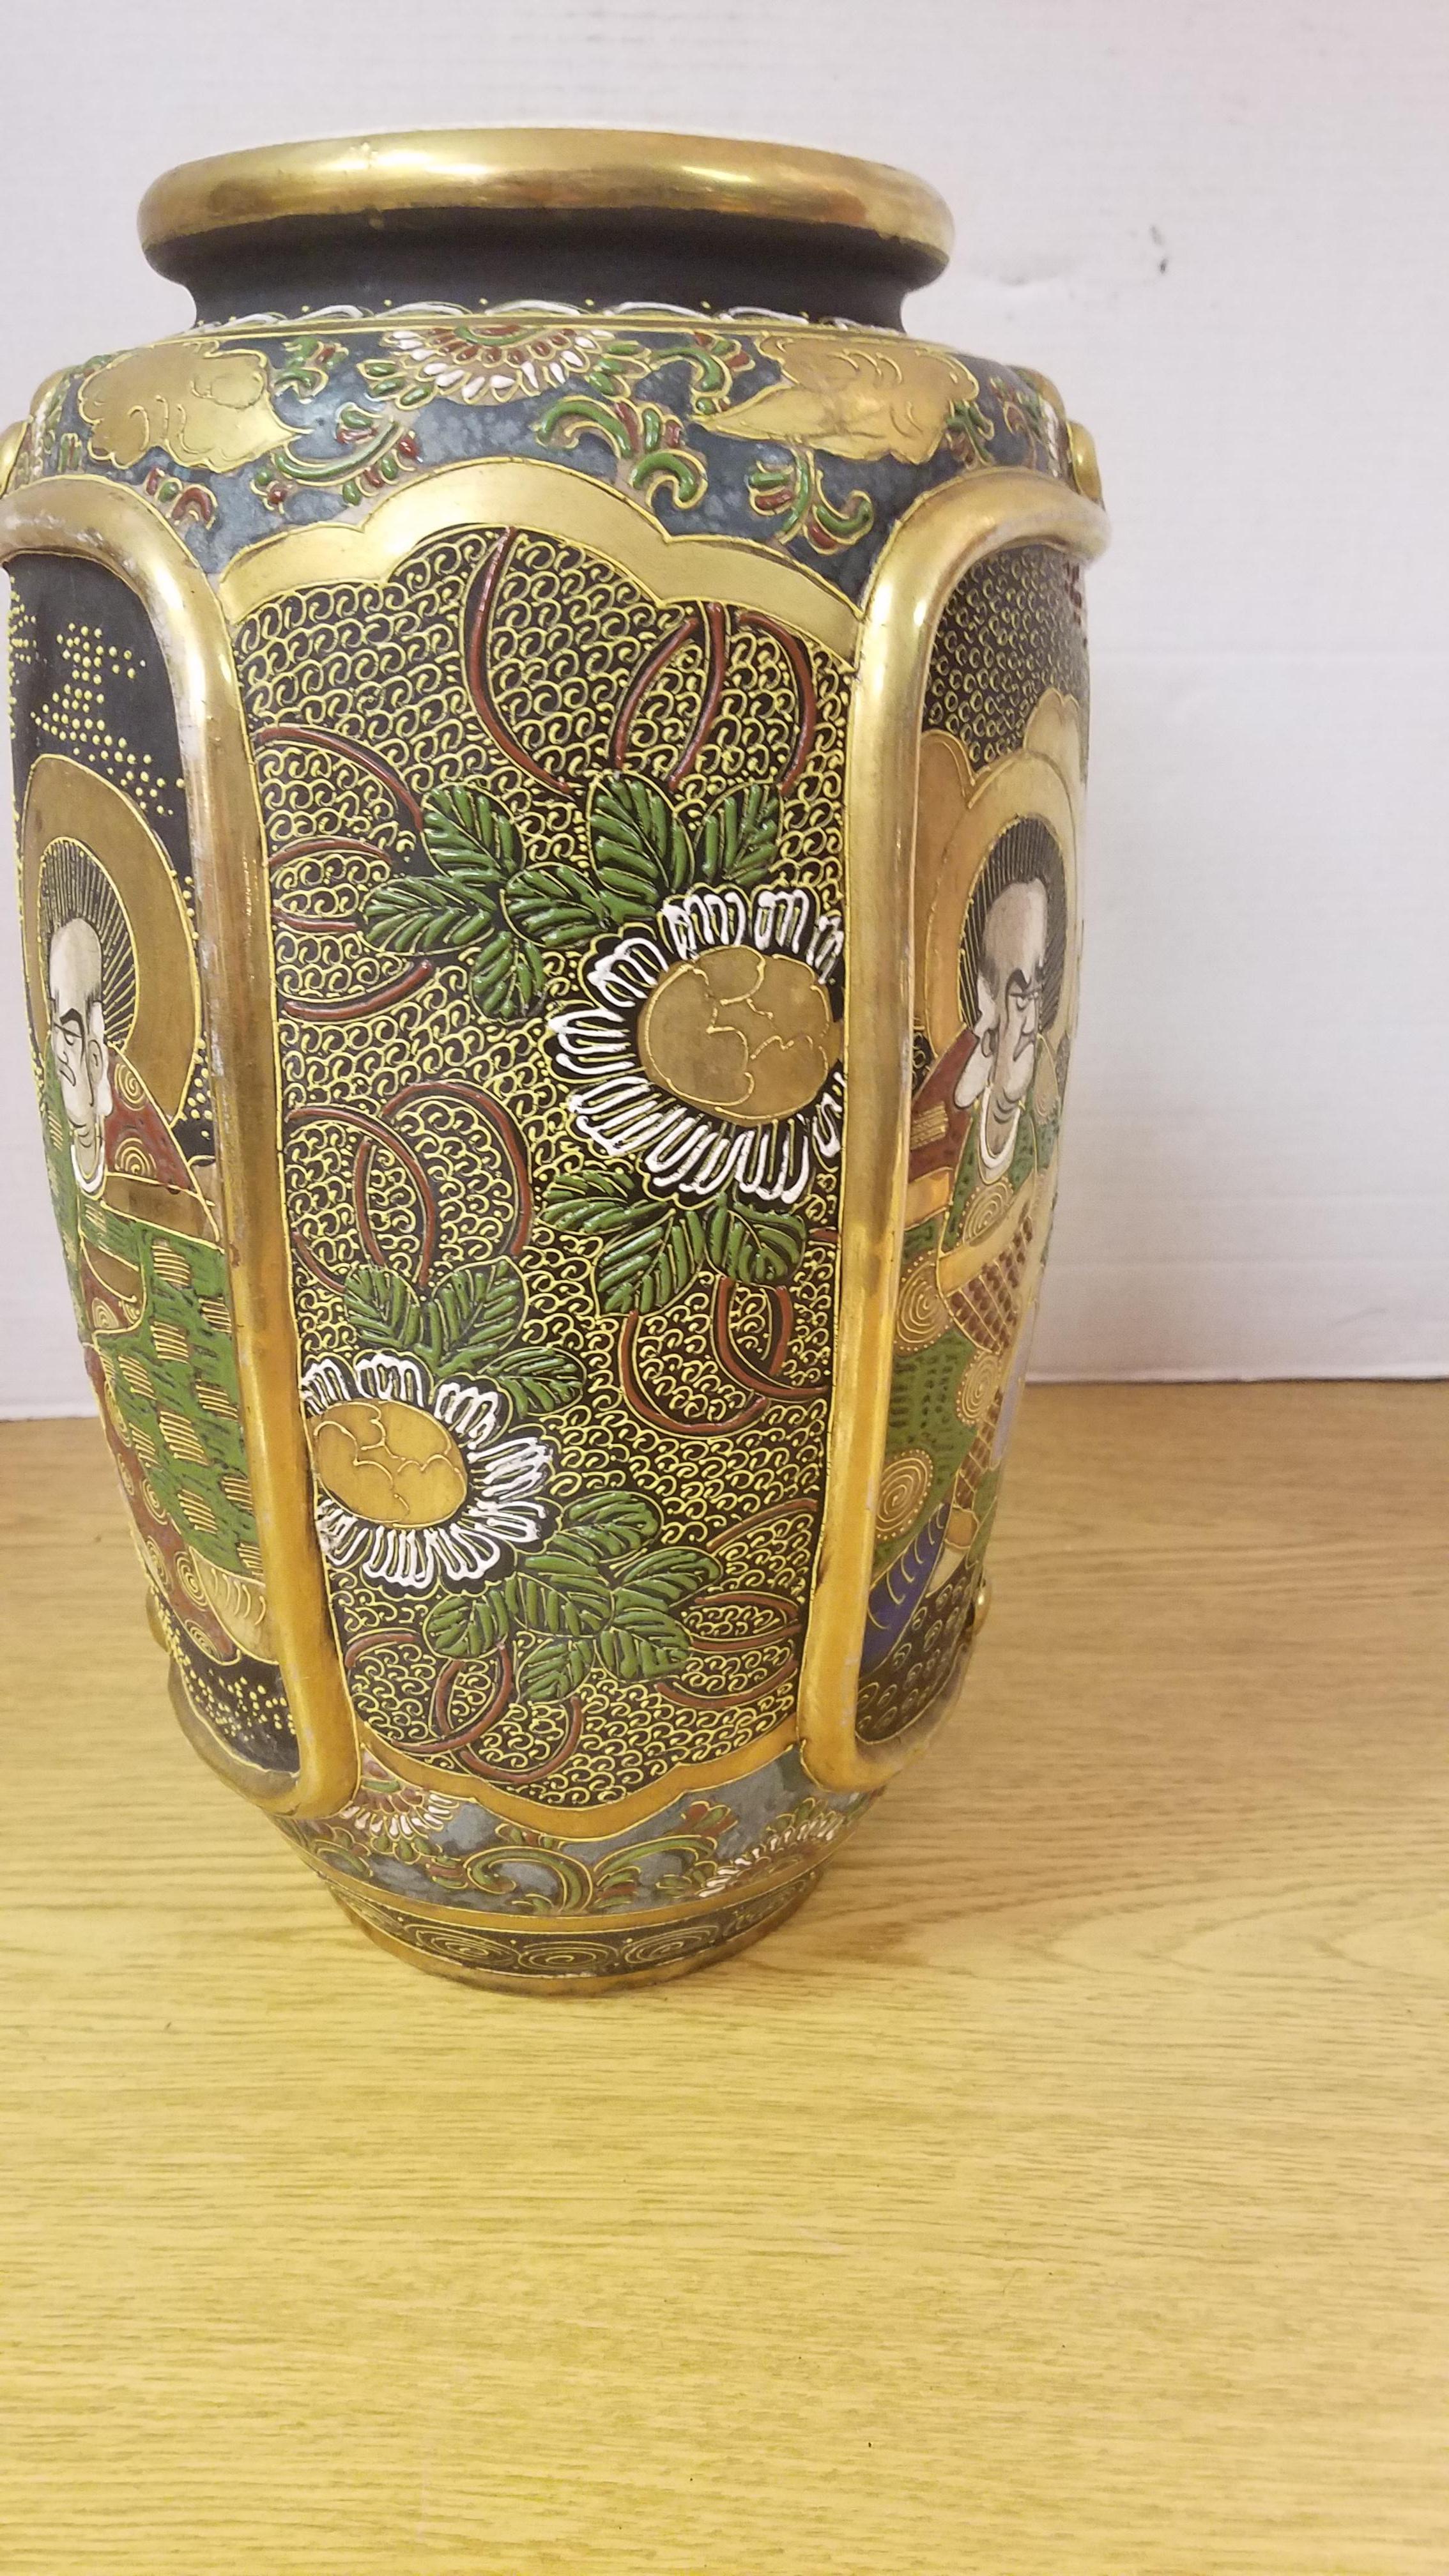 Beautifully detailed and hand painted Japanese Satsuma vase. The dark matte background accentuates the with vibrant gold gilding and rich colors in the painting. Some of the gilding is raised for a 3 dimensional look as well as the raised detail of